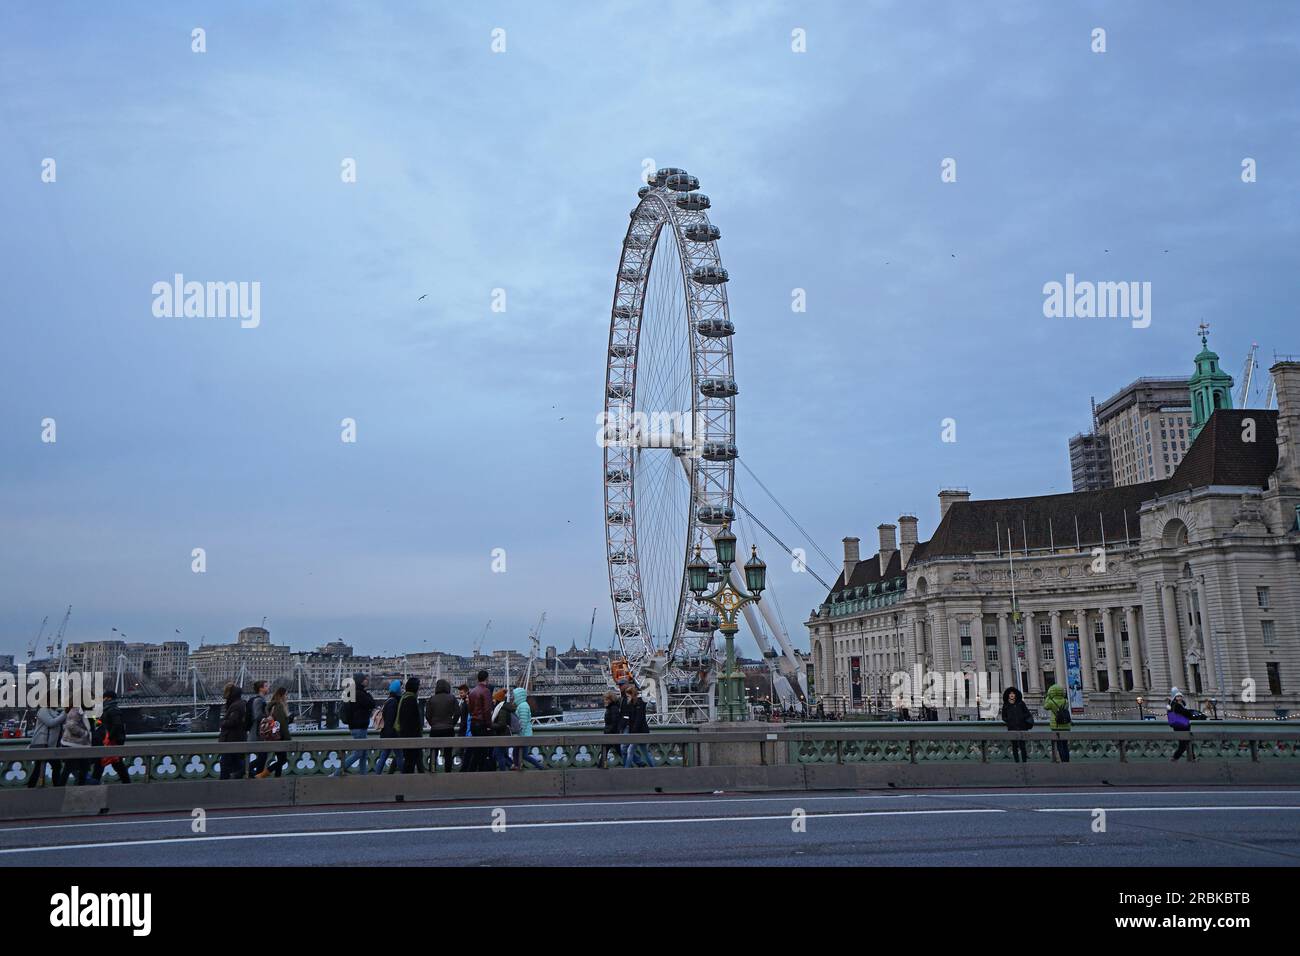 Exterior European architecture and design of London eye Ferris wheel, Europe's tallest cantilevered observation wheel on river Thames- United Kingdom Stock Photo